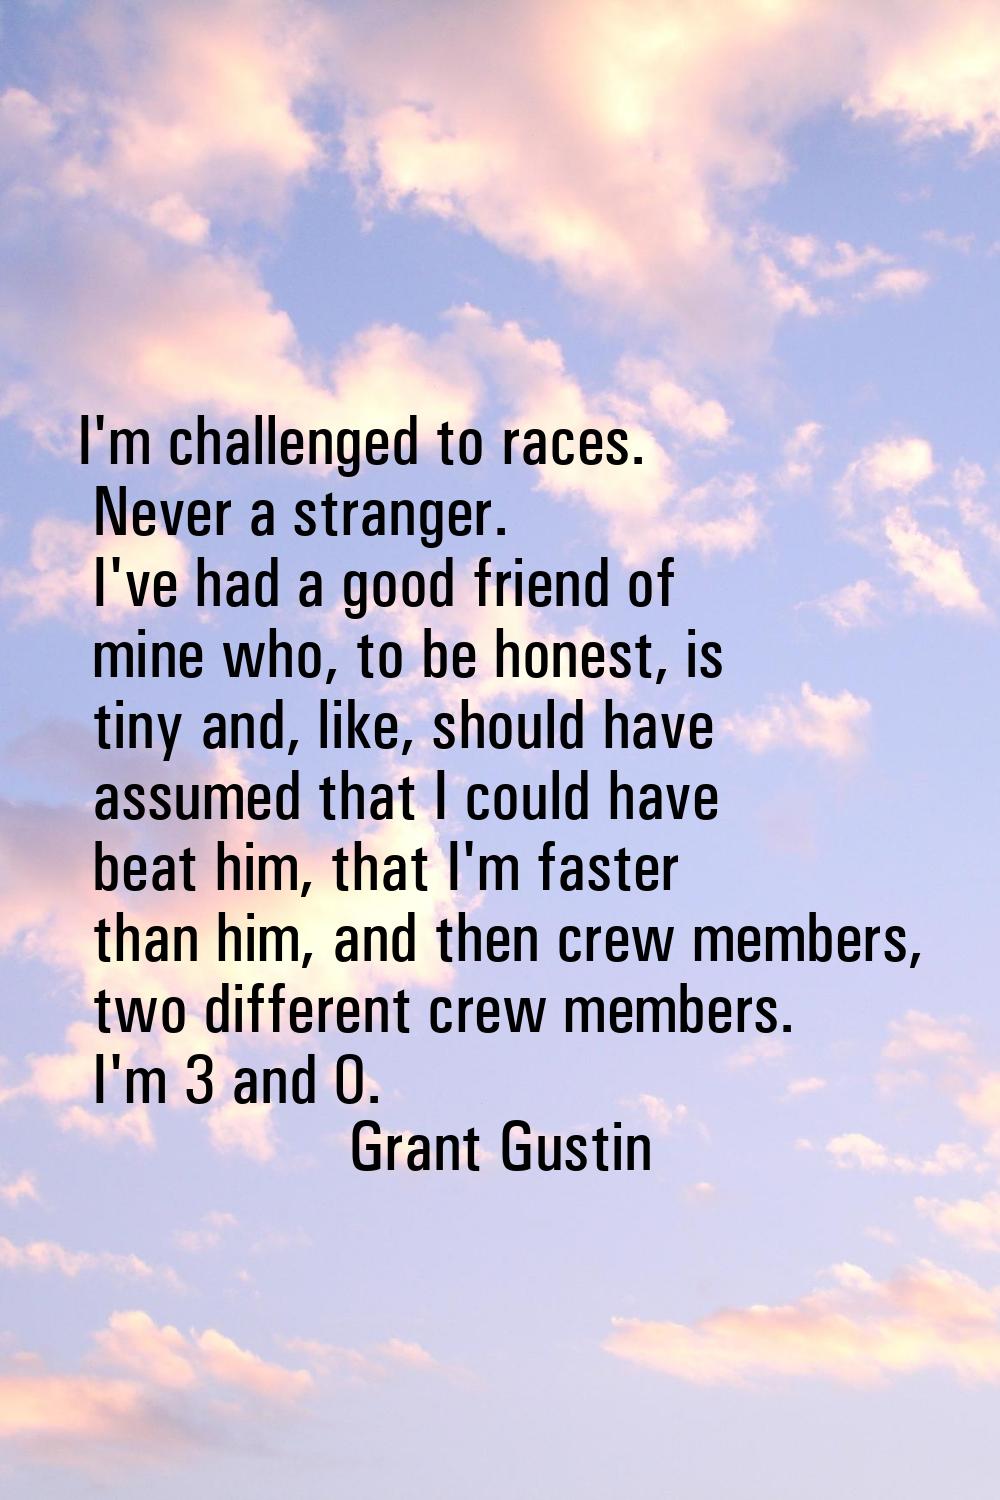 I'm challenged to races. Never a stranger. I've had a good friend of mine who, to be honest, is tin